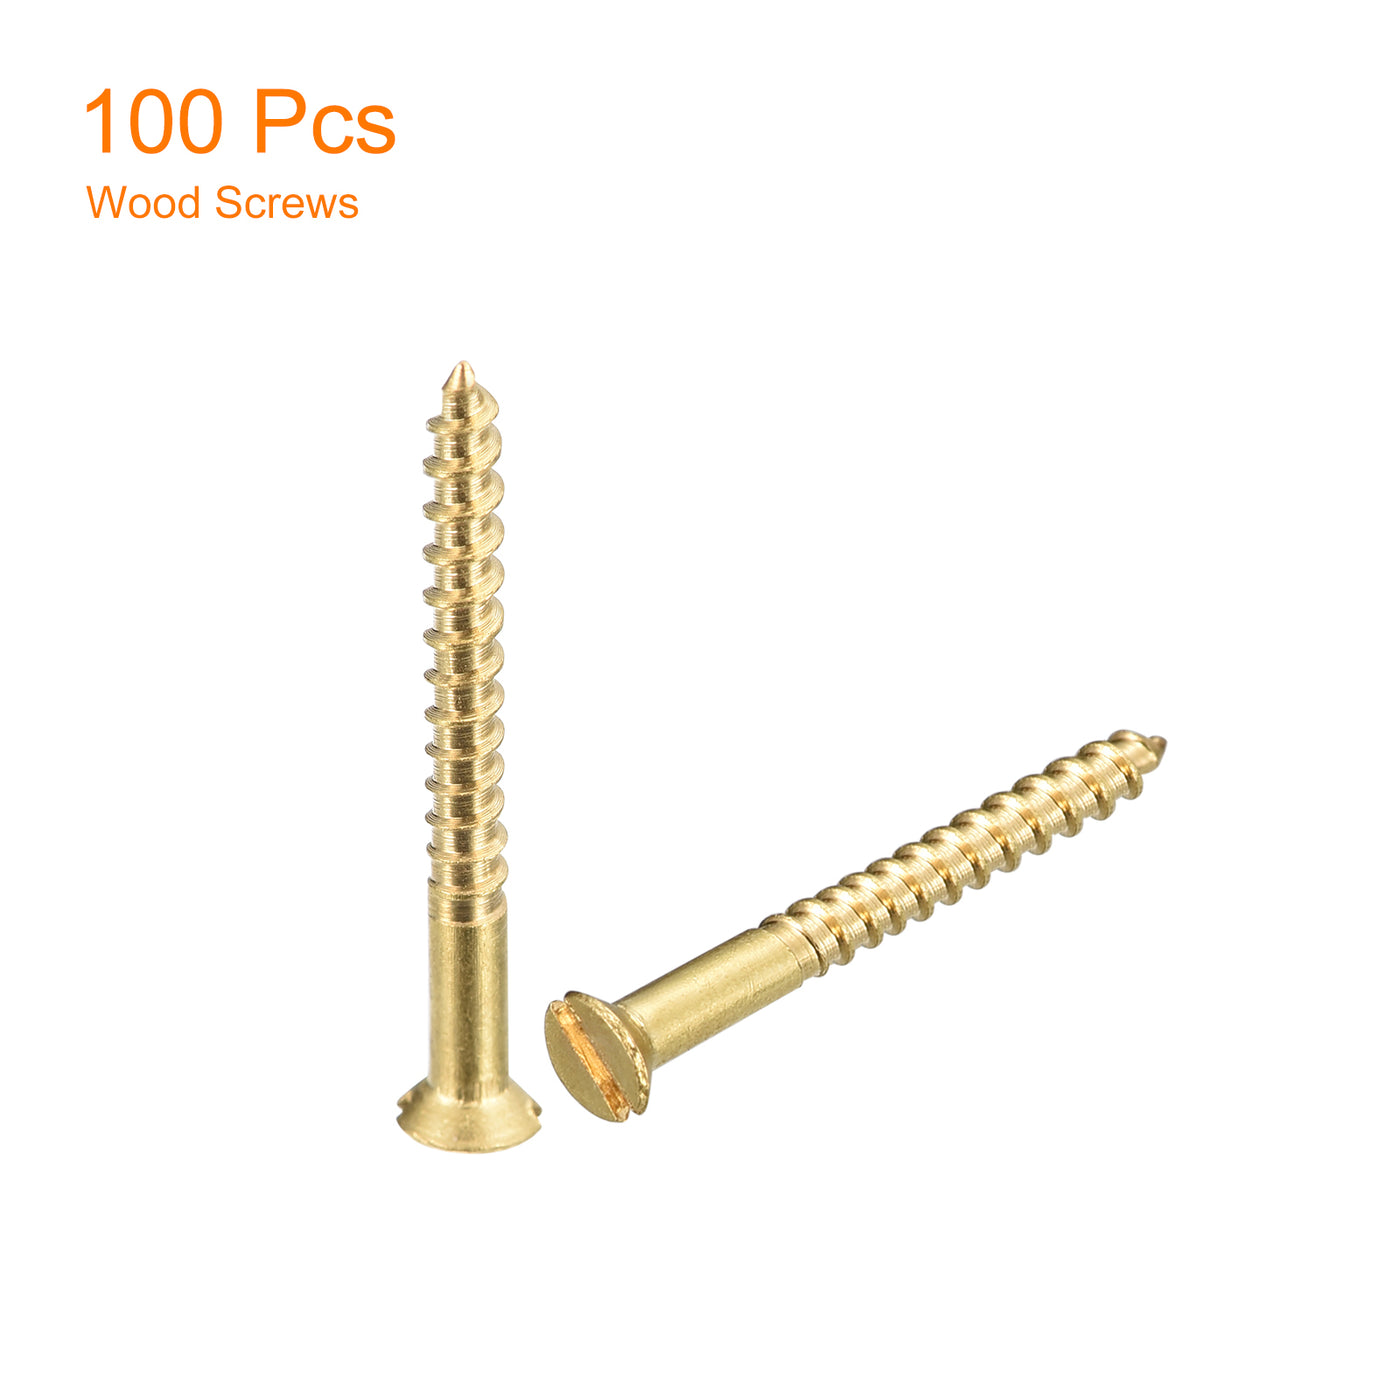 uxcell Uxcell 100Pcs M2 x 20mm Brass Slotted Drive Flat Head Wood Screws Self Tapping Screw